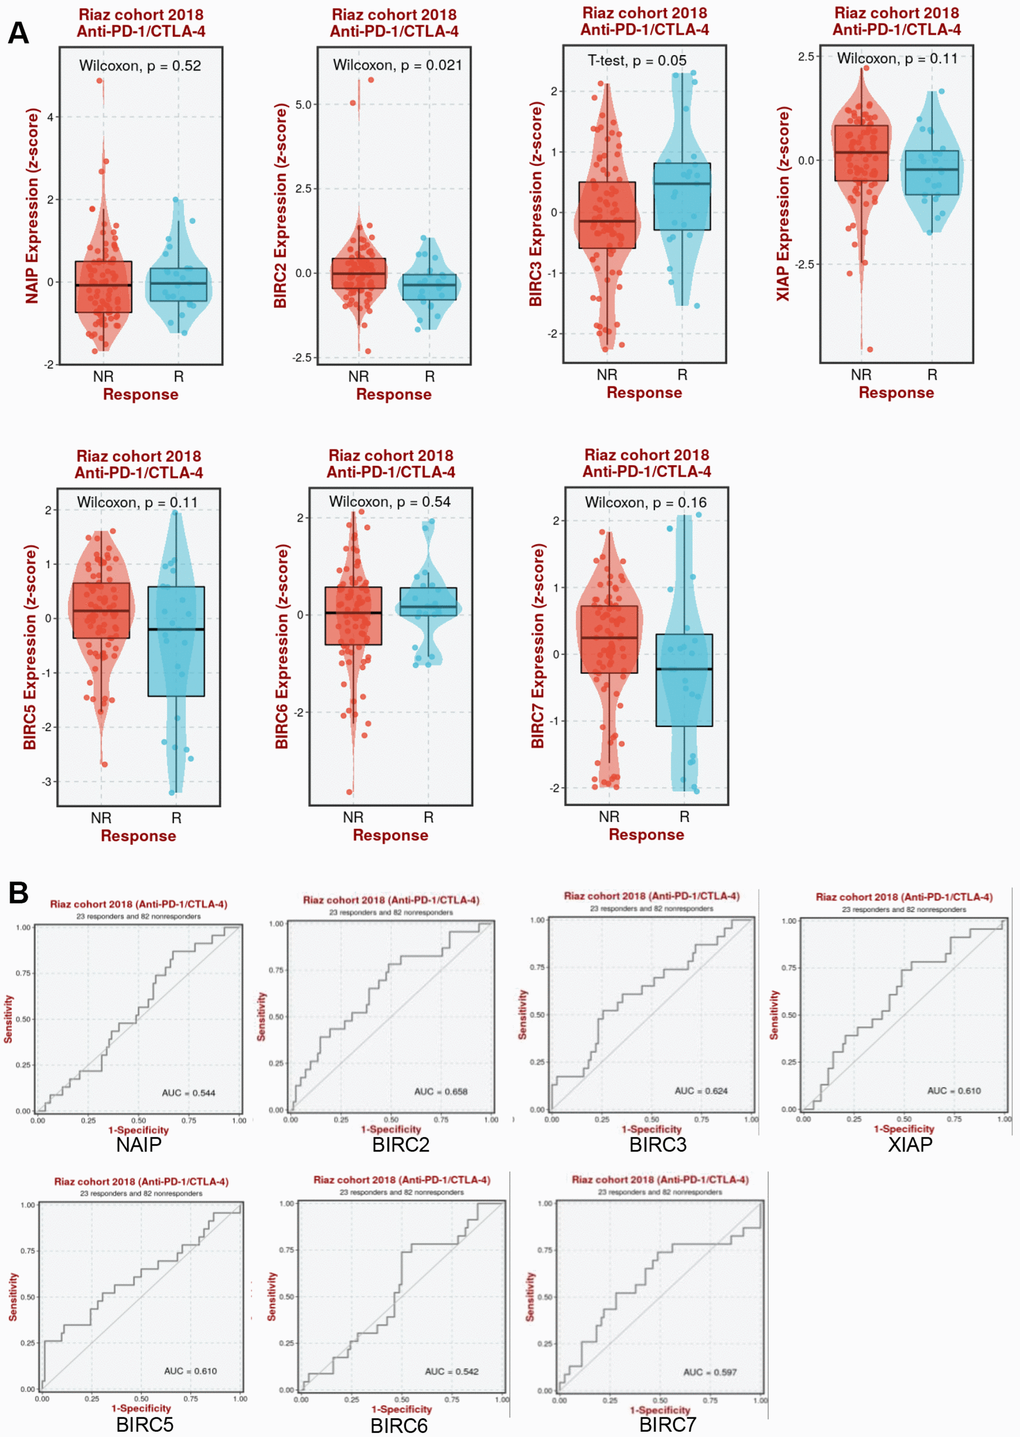 Association between IAP family members and immunotherapy efficacy. (A) Comparative analysis of the IAP family members levels in Riaz cohorts of anti-PD-1/CTLA-4 responders and non-responders. (B) Patients in the Riaz cohorts’ ROC curve for the IAP family.